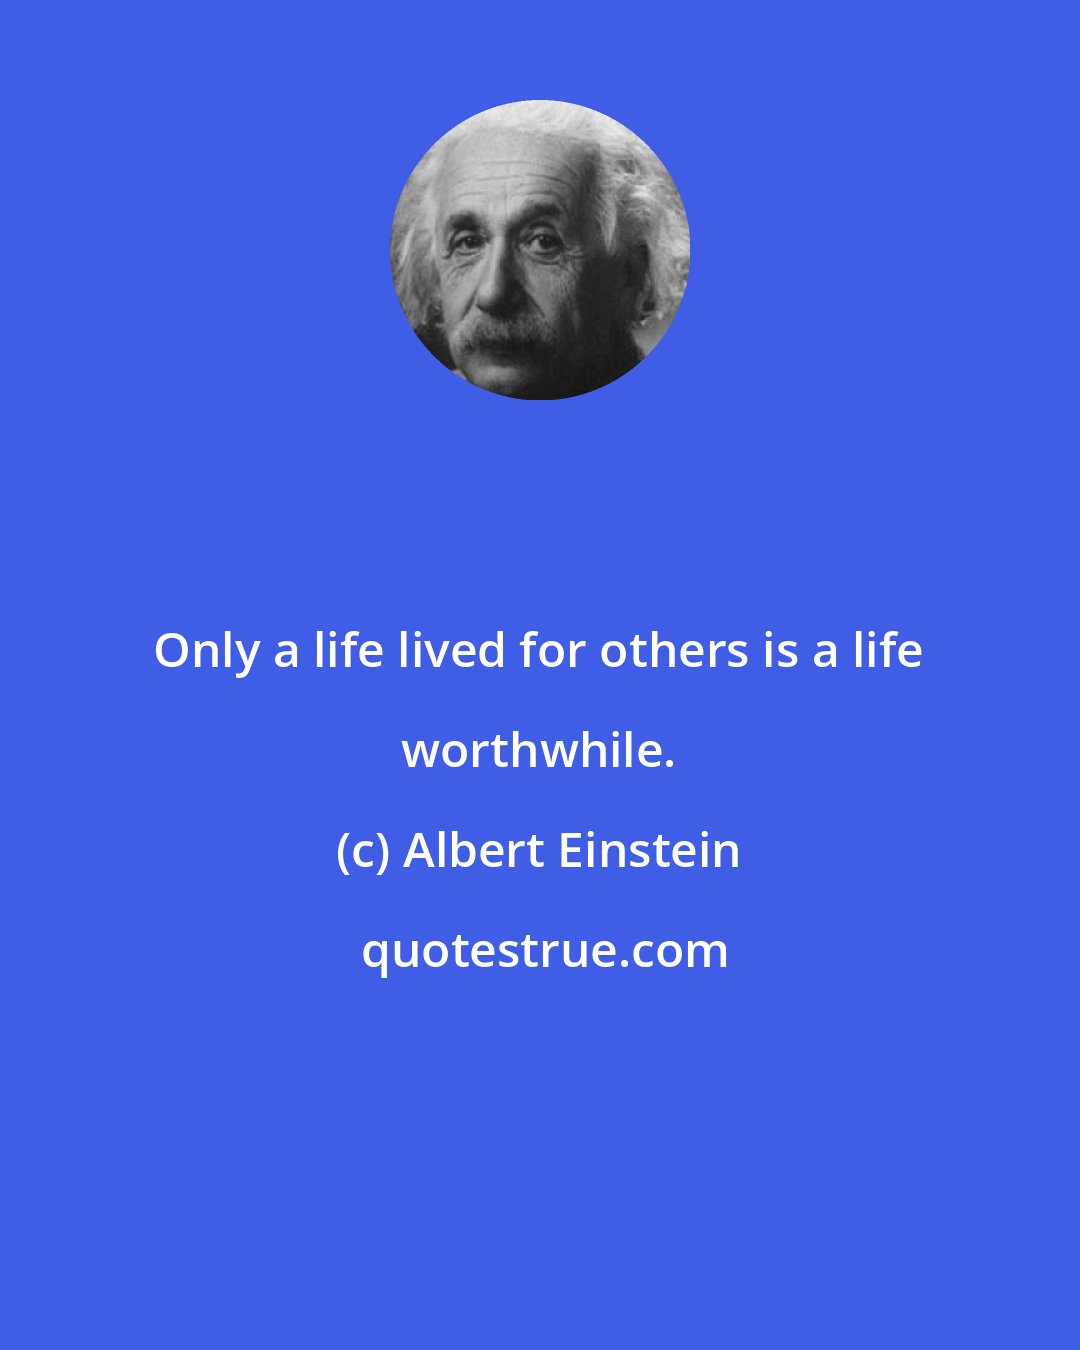 Albert Einstein: Only a life lived for others is a life worthwhile.